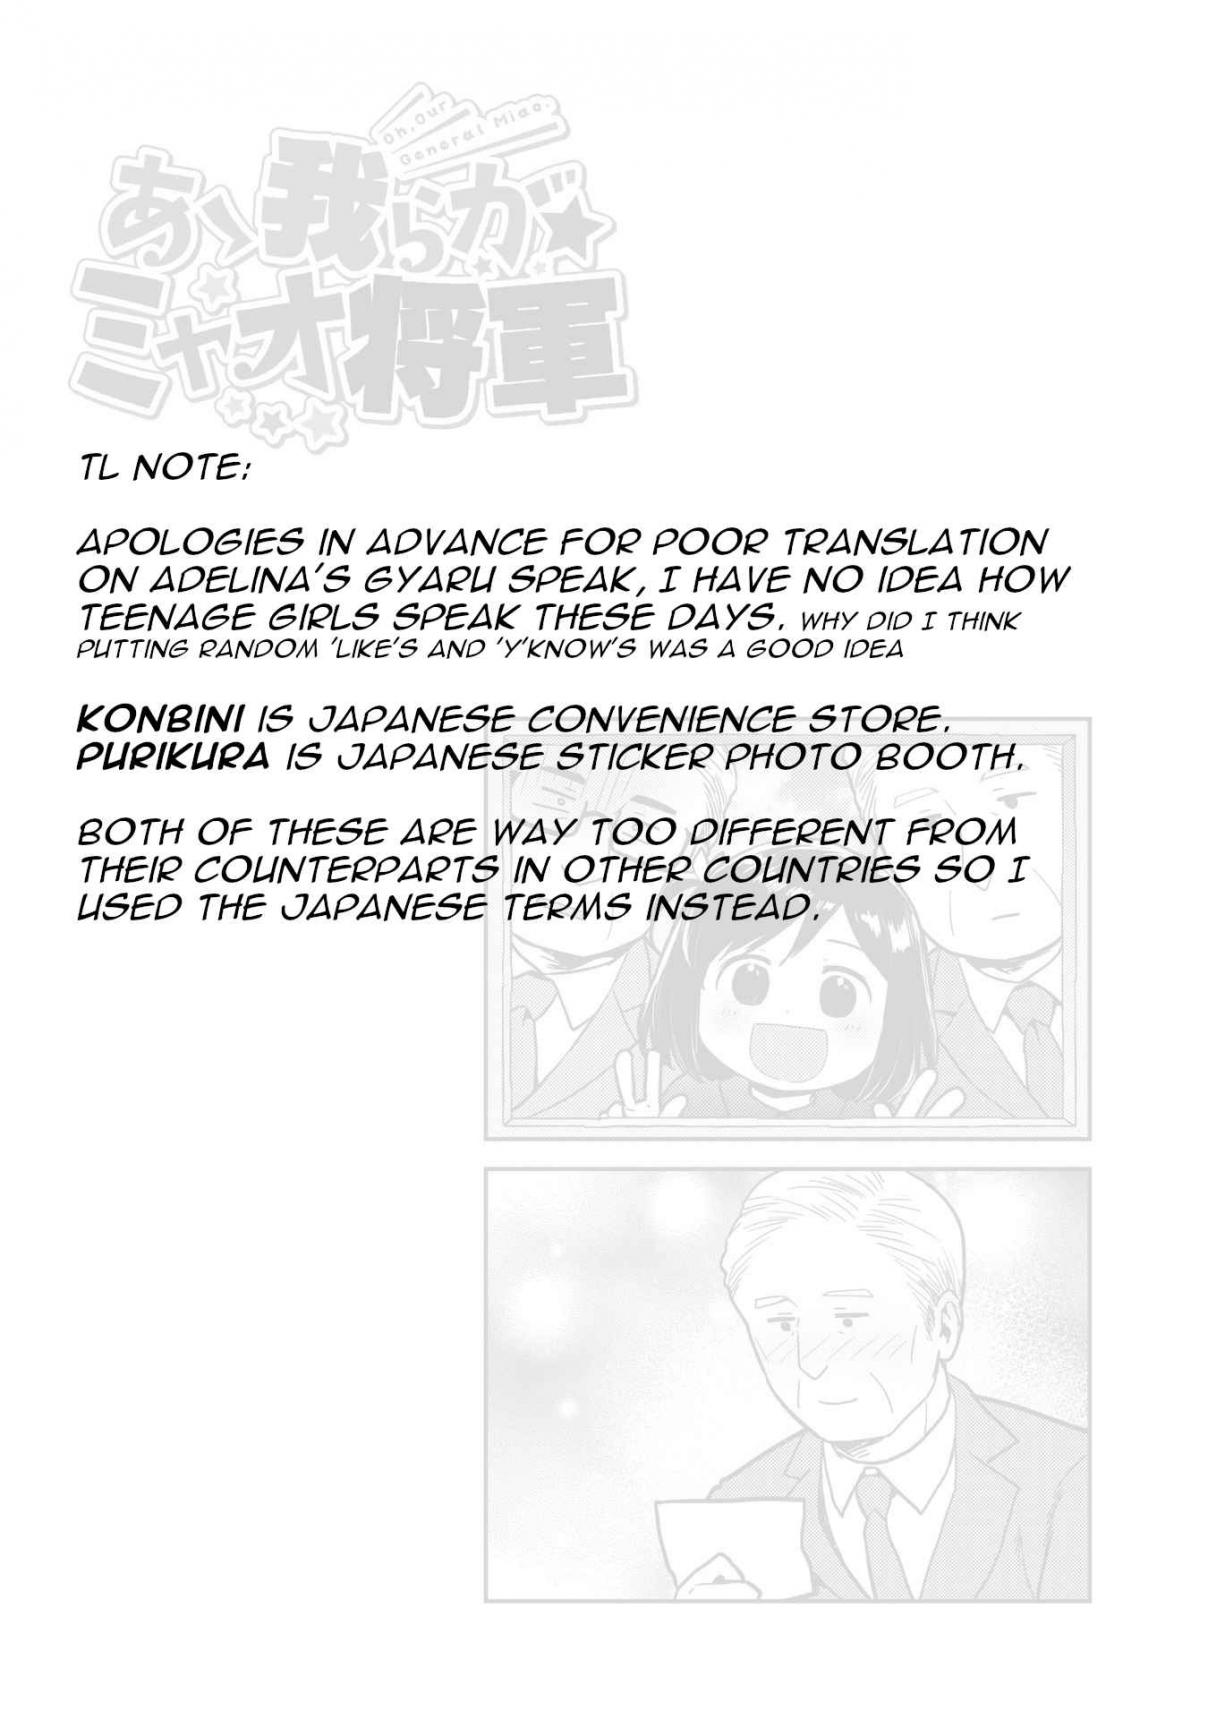 Oh, Our General Myao Vol. 1 Ch. 10 In Which Myao Learns Other Cultures